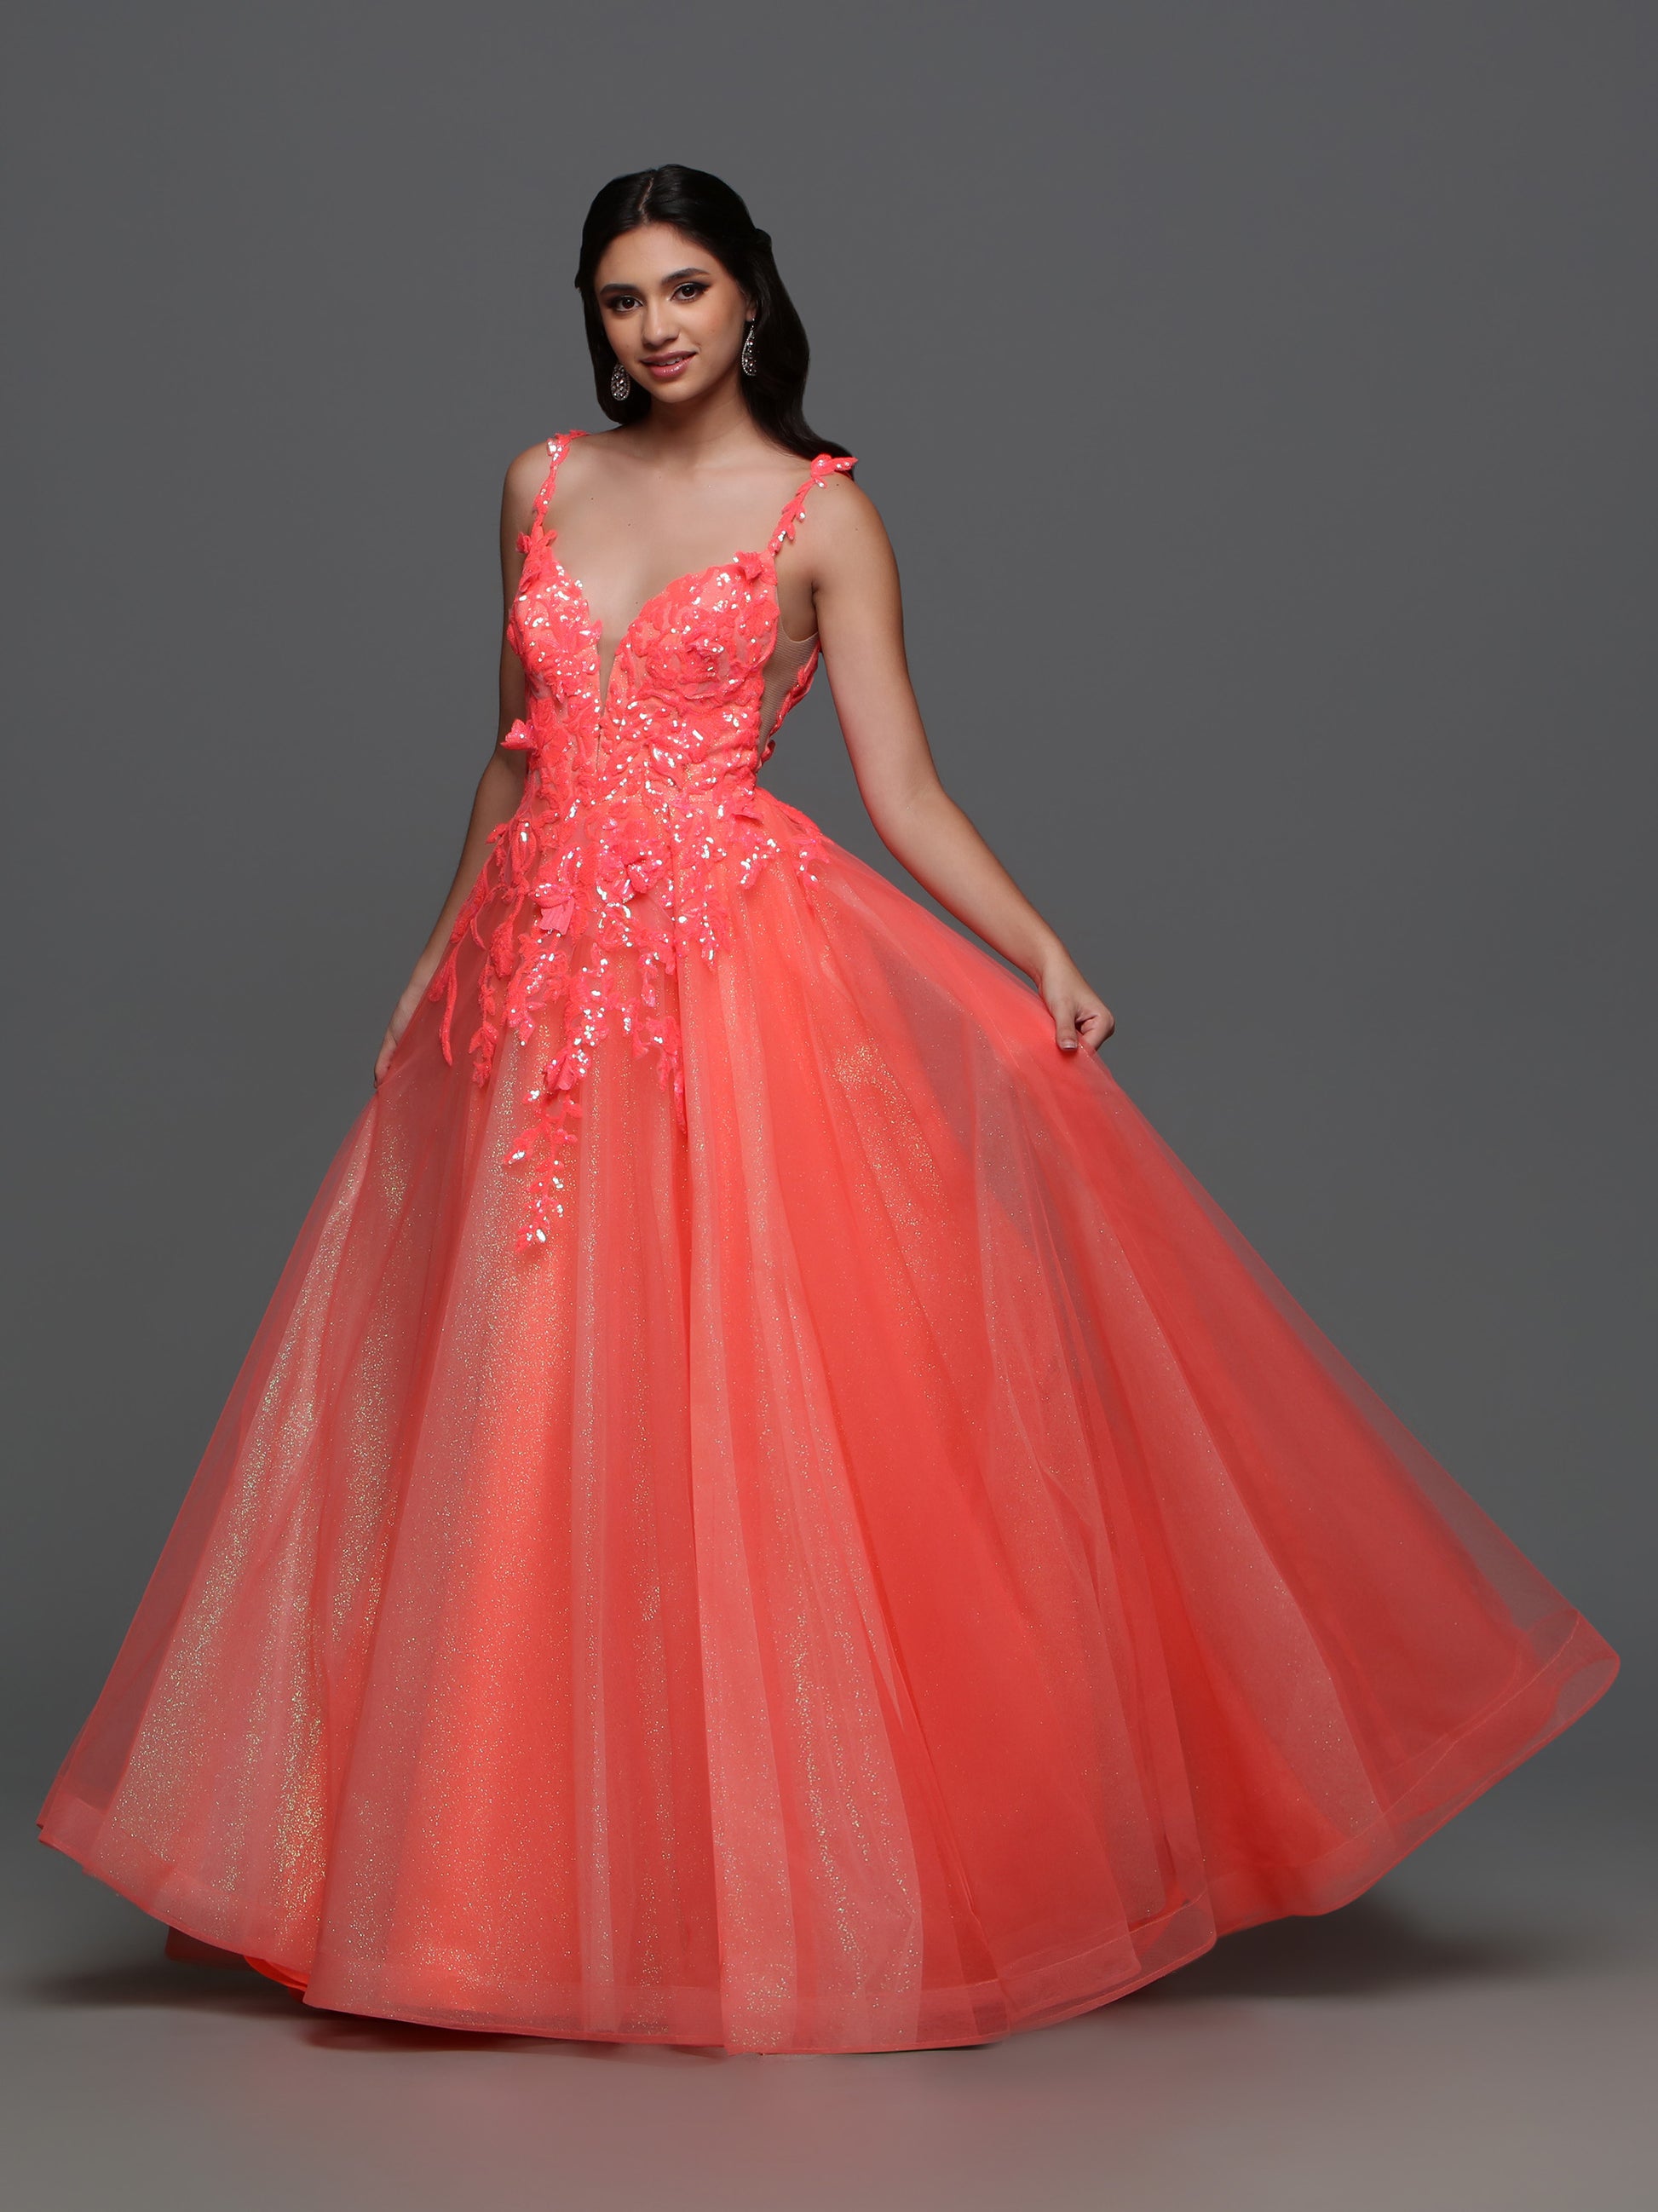 Elevate your formal look with the Candice Wang 72388 Long Shimmer Sequin Ballgown Prom Dress. The A-line silhouette and Glitter tulle details are complemented by the shimmering sequin lace, giving you an undeniable sparkle. Make a statement at your next event with this elegant and stylish dress.  Sizes: 0-20  Colors: Coral 